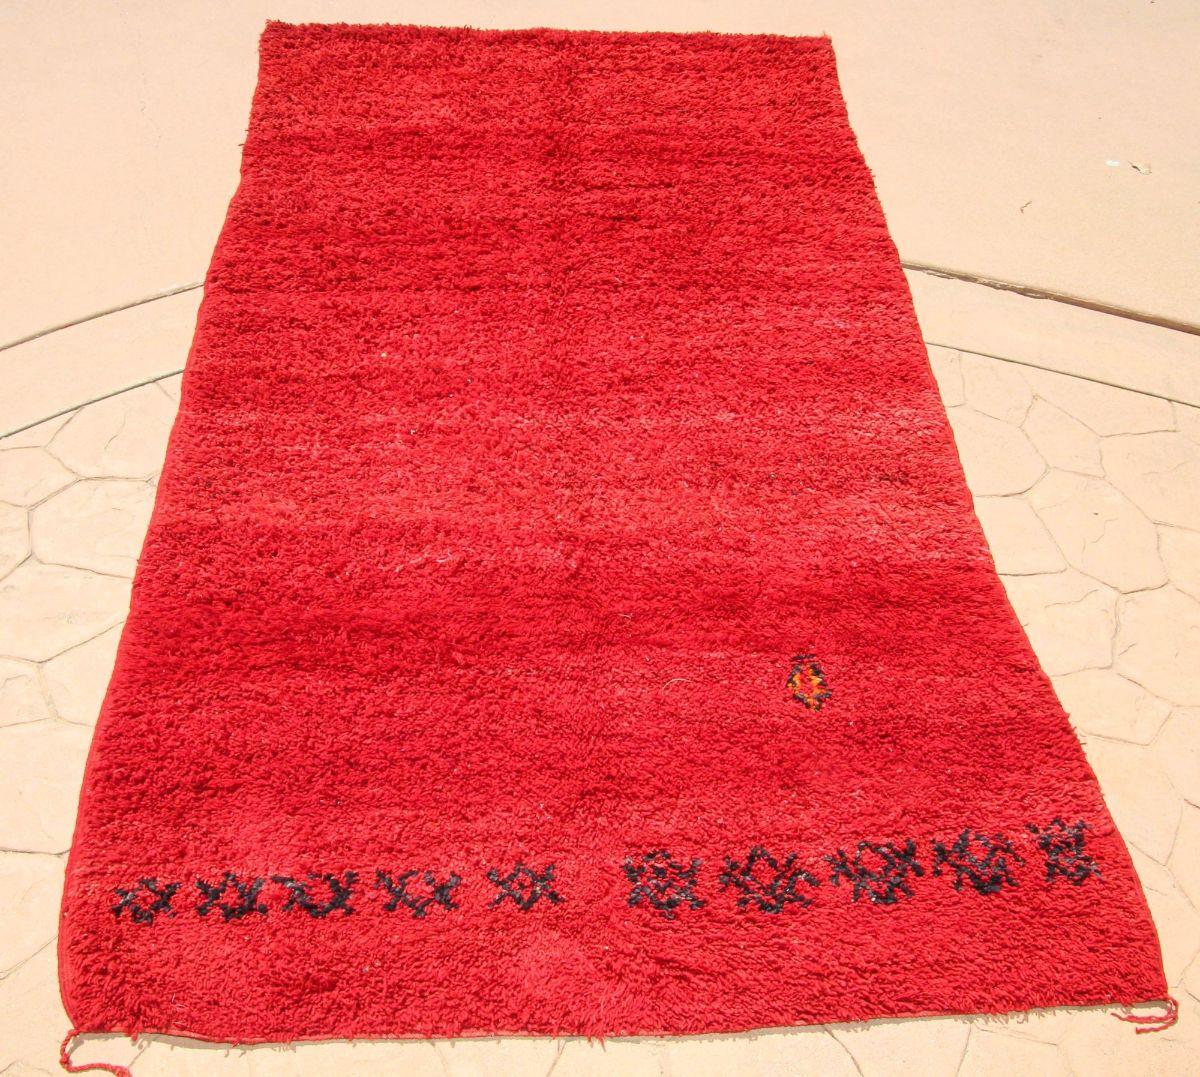 1960s Vintage Red Ethnic Moroccan Fluffy Rug.Vintage authentic tribal Moroccan Berber rug from the Middle Atlas mountains. Monochromatic red ethnic African rug with variations in cor intensity typical for this tribe. This is a good example of Berber